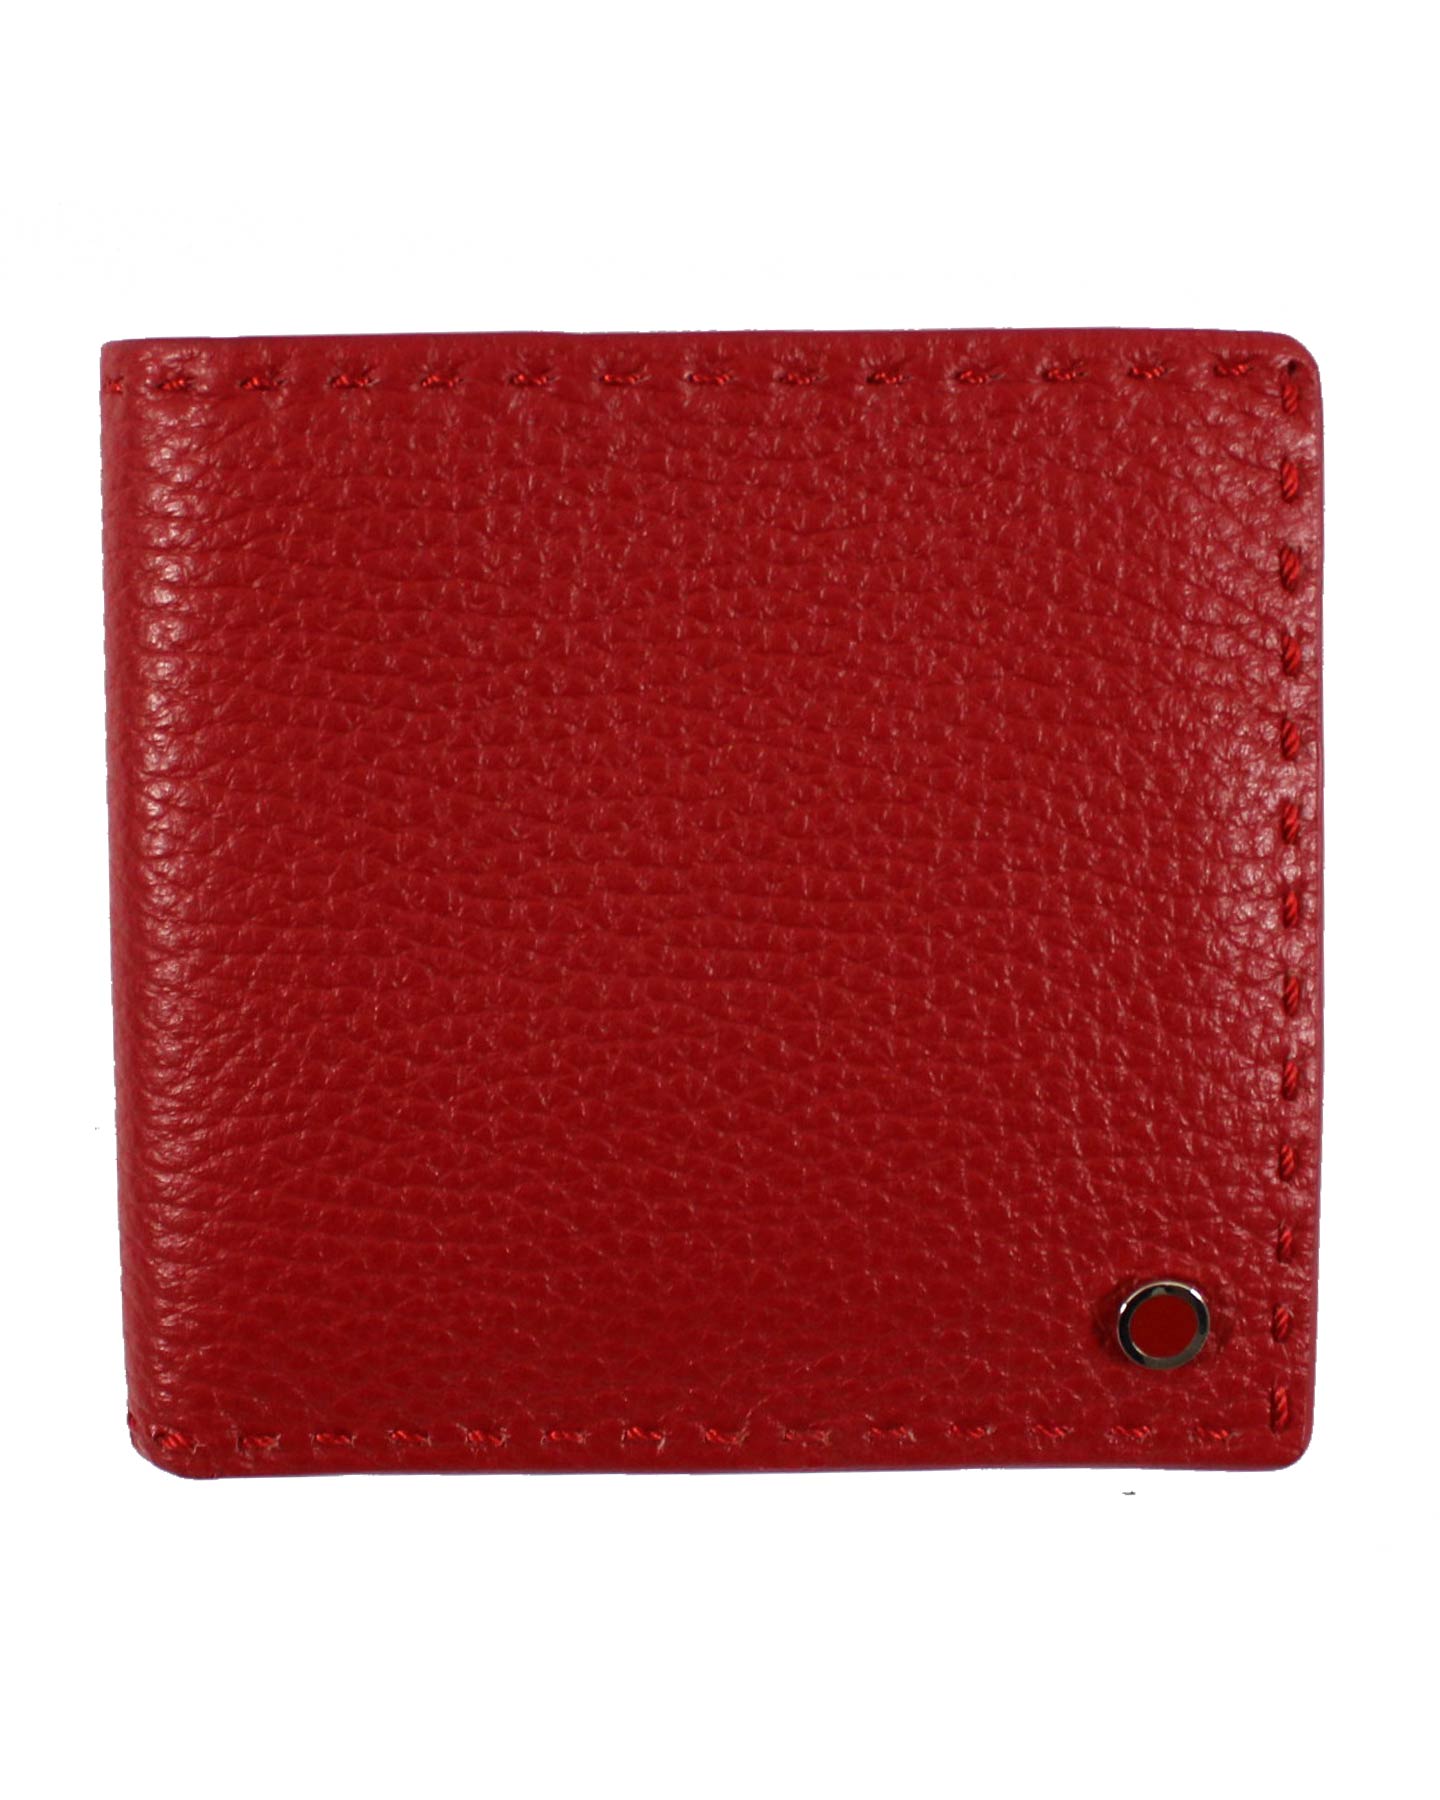 Kiton Wallet Red Grain Leather New